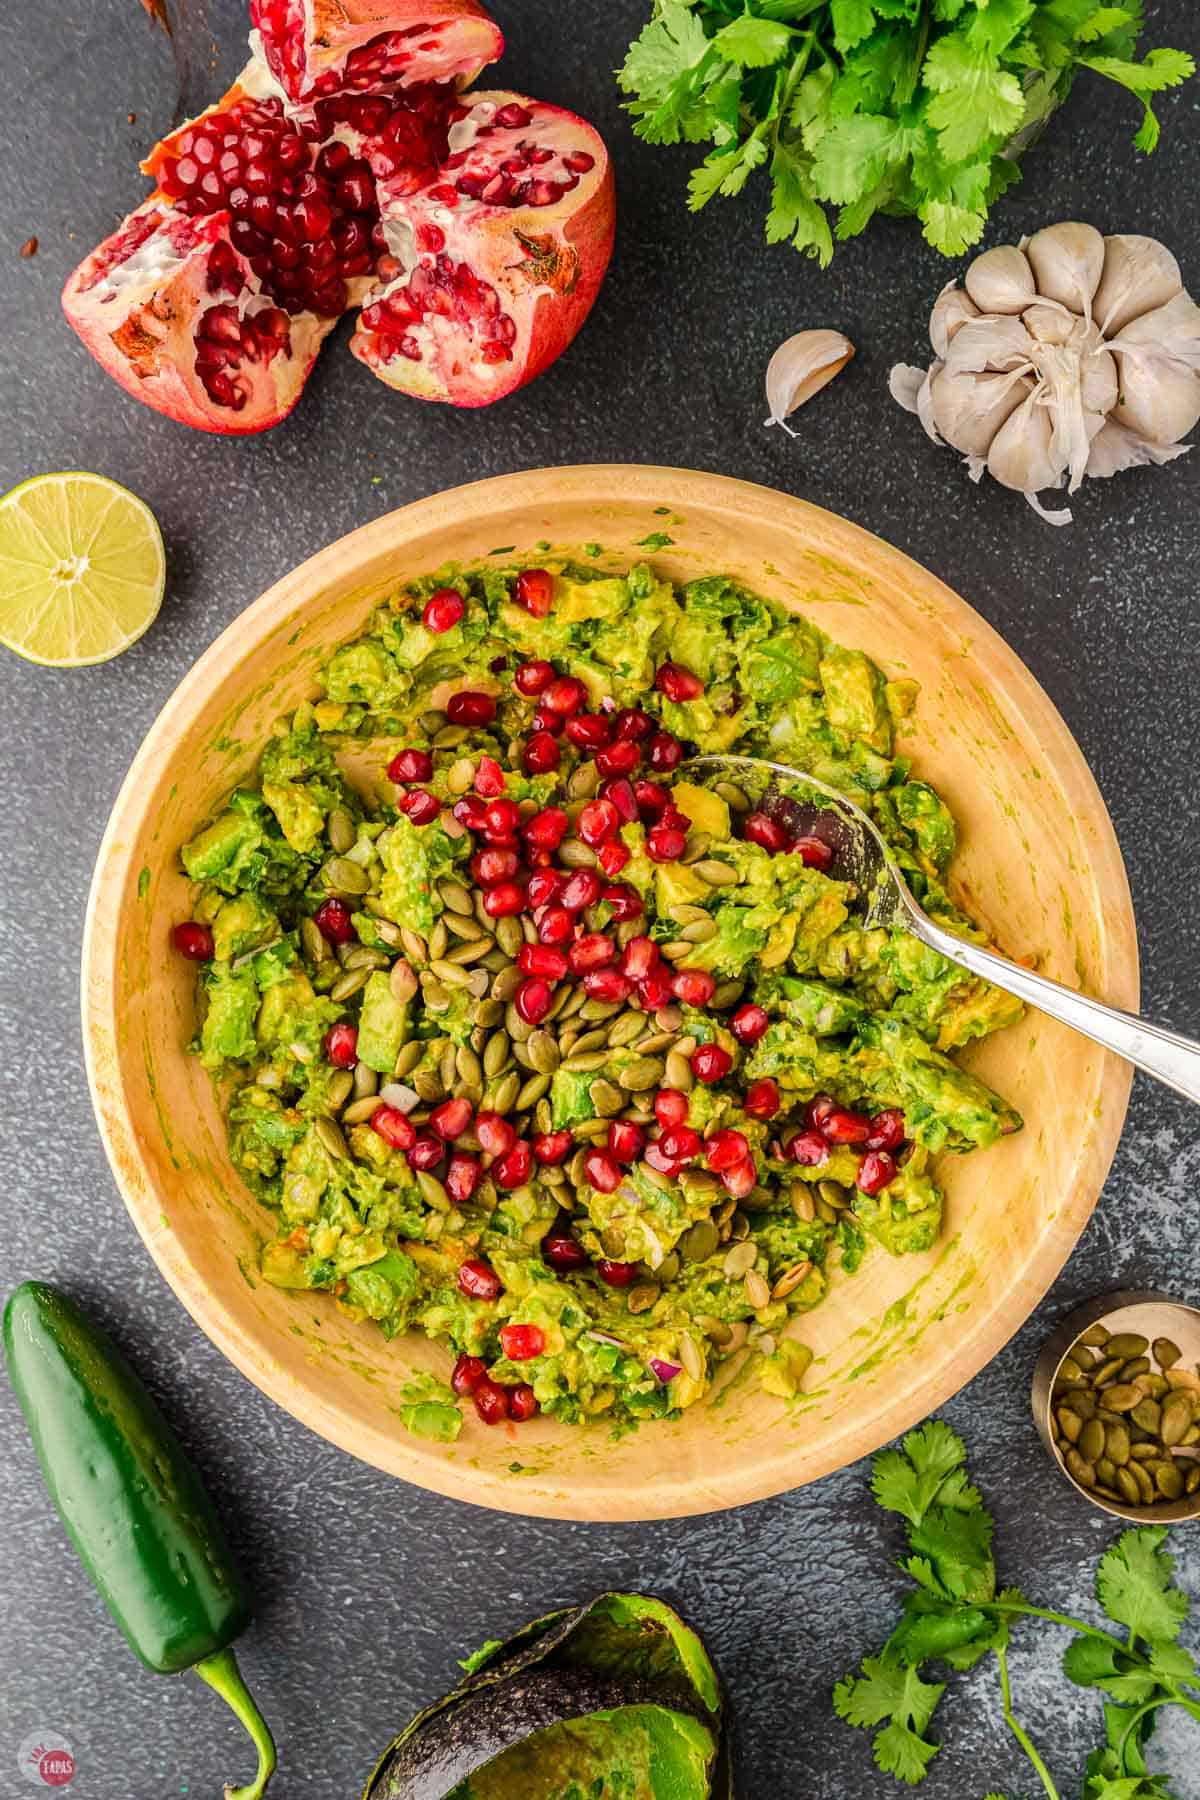 sprinkle pomegranate arils on top of the guacamole